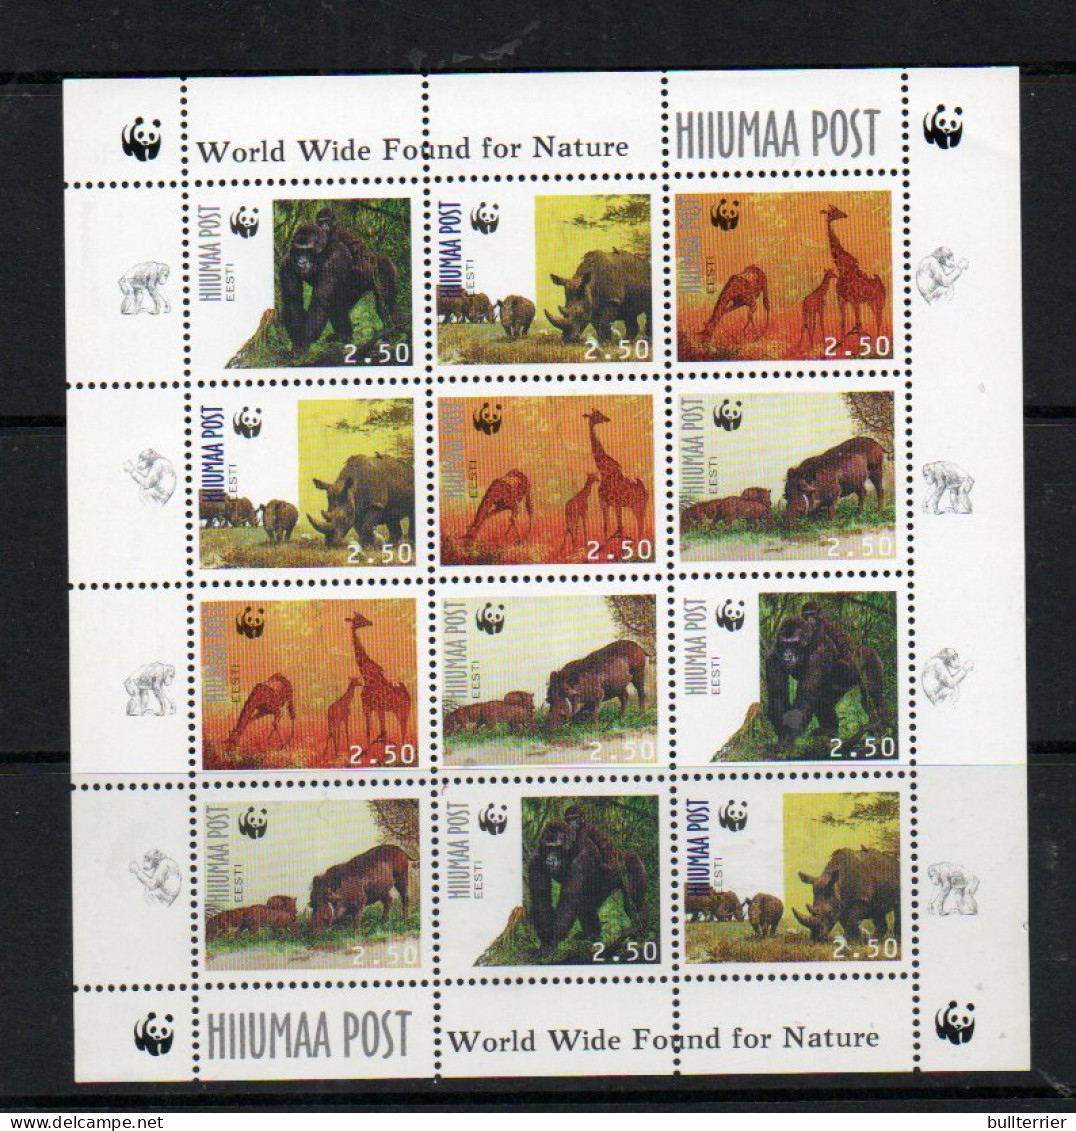 RUSSIA LOCALS - HIIUMAA POST  - WWF SET OF 4 IN SHEETLET OF 12  MINT NEVER HINGED - Other & Unclassified